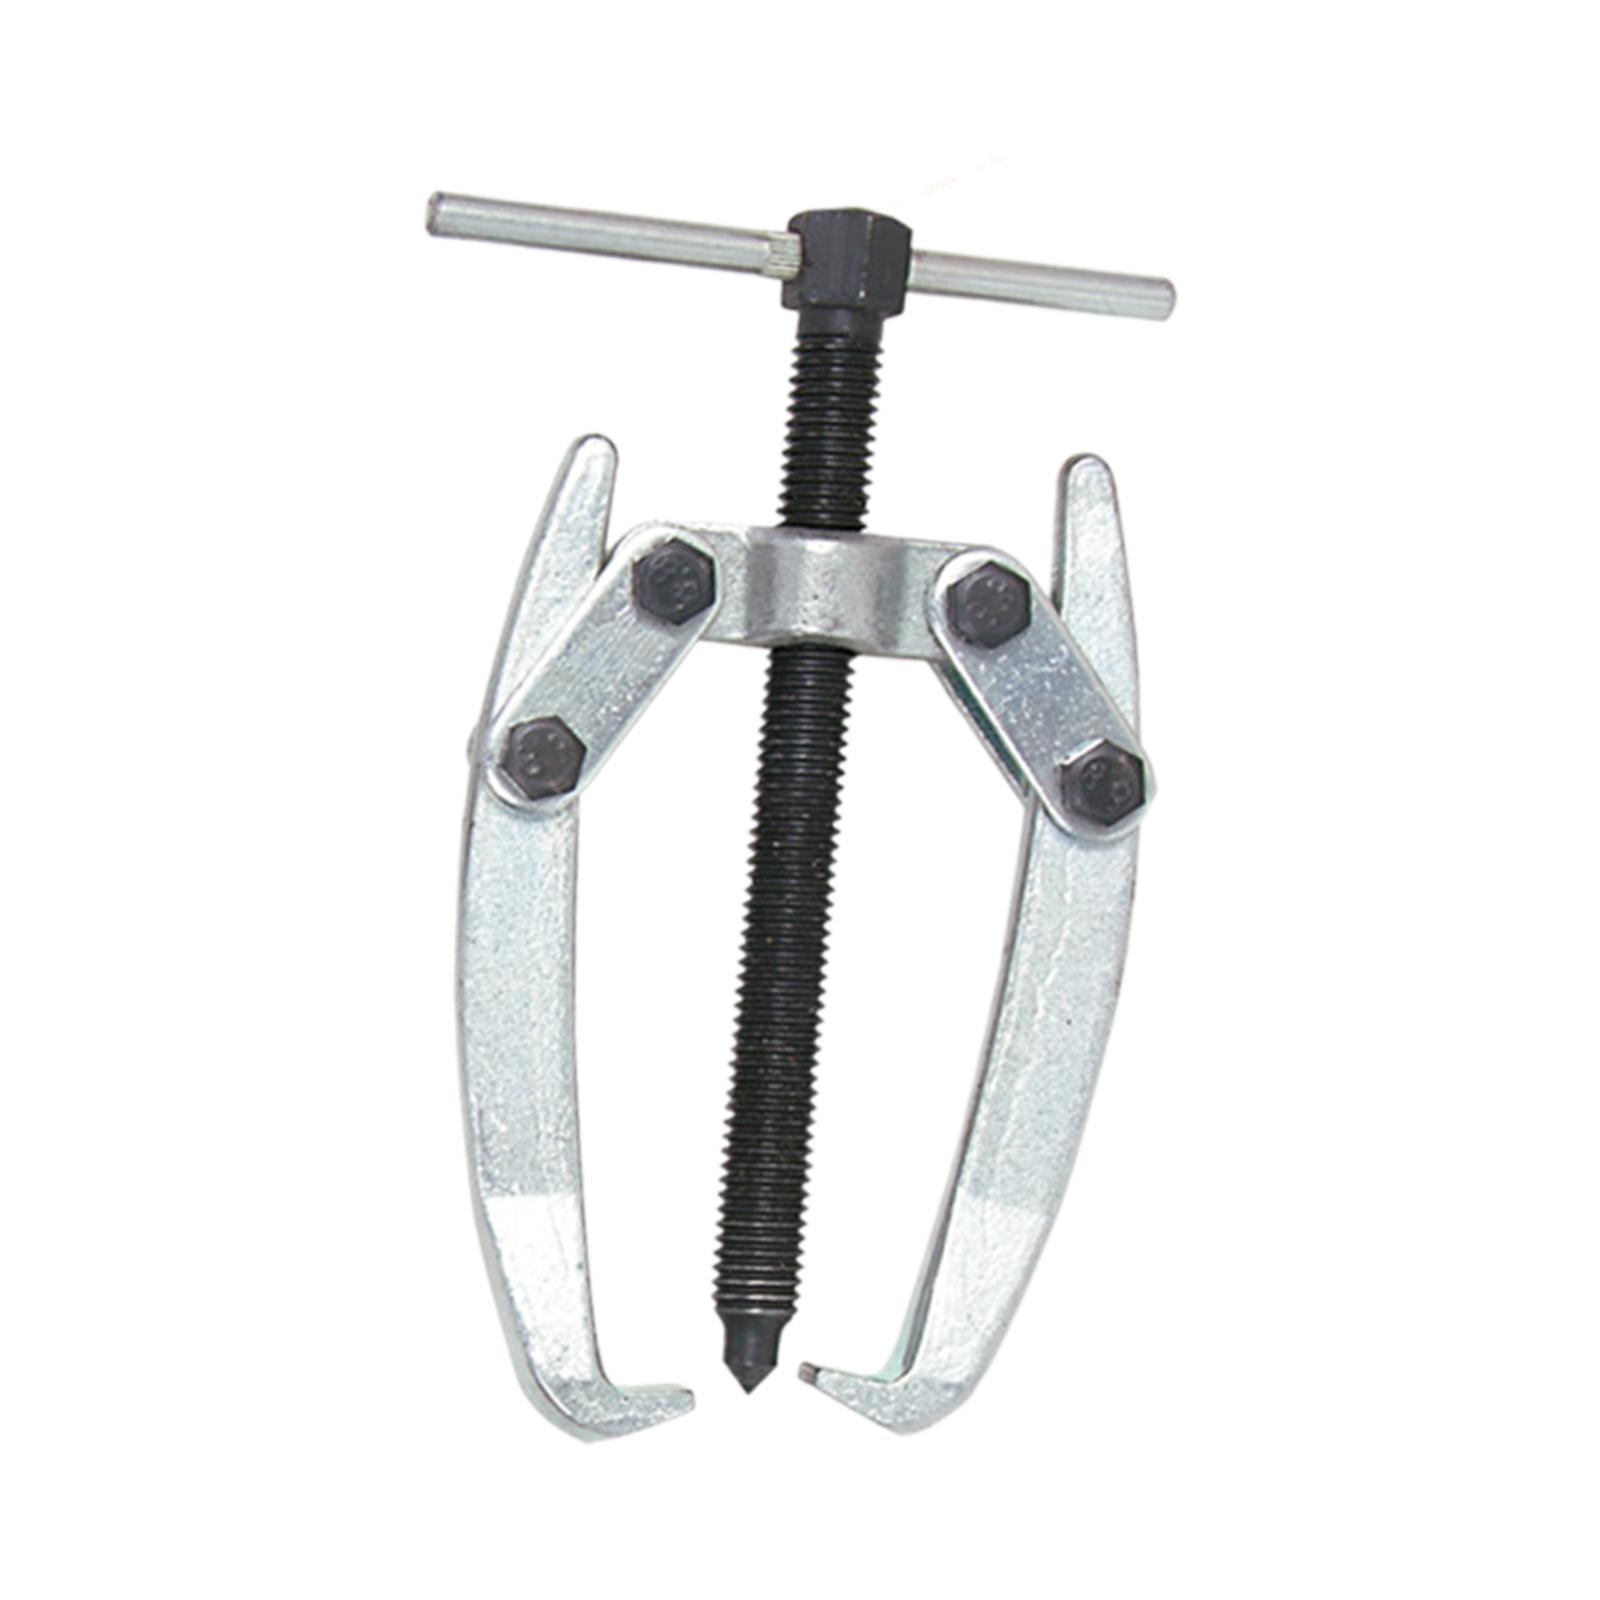 Bearing Gears Puller Jaw Puller Professional Accessories Pump Pulley Remover 2 Jaws 10 to 80mm